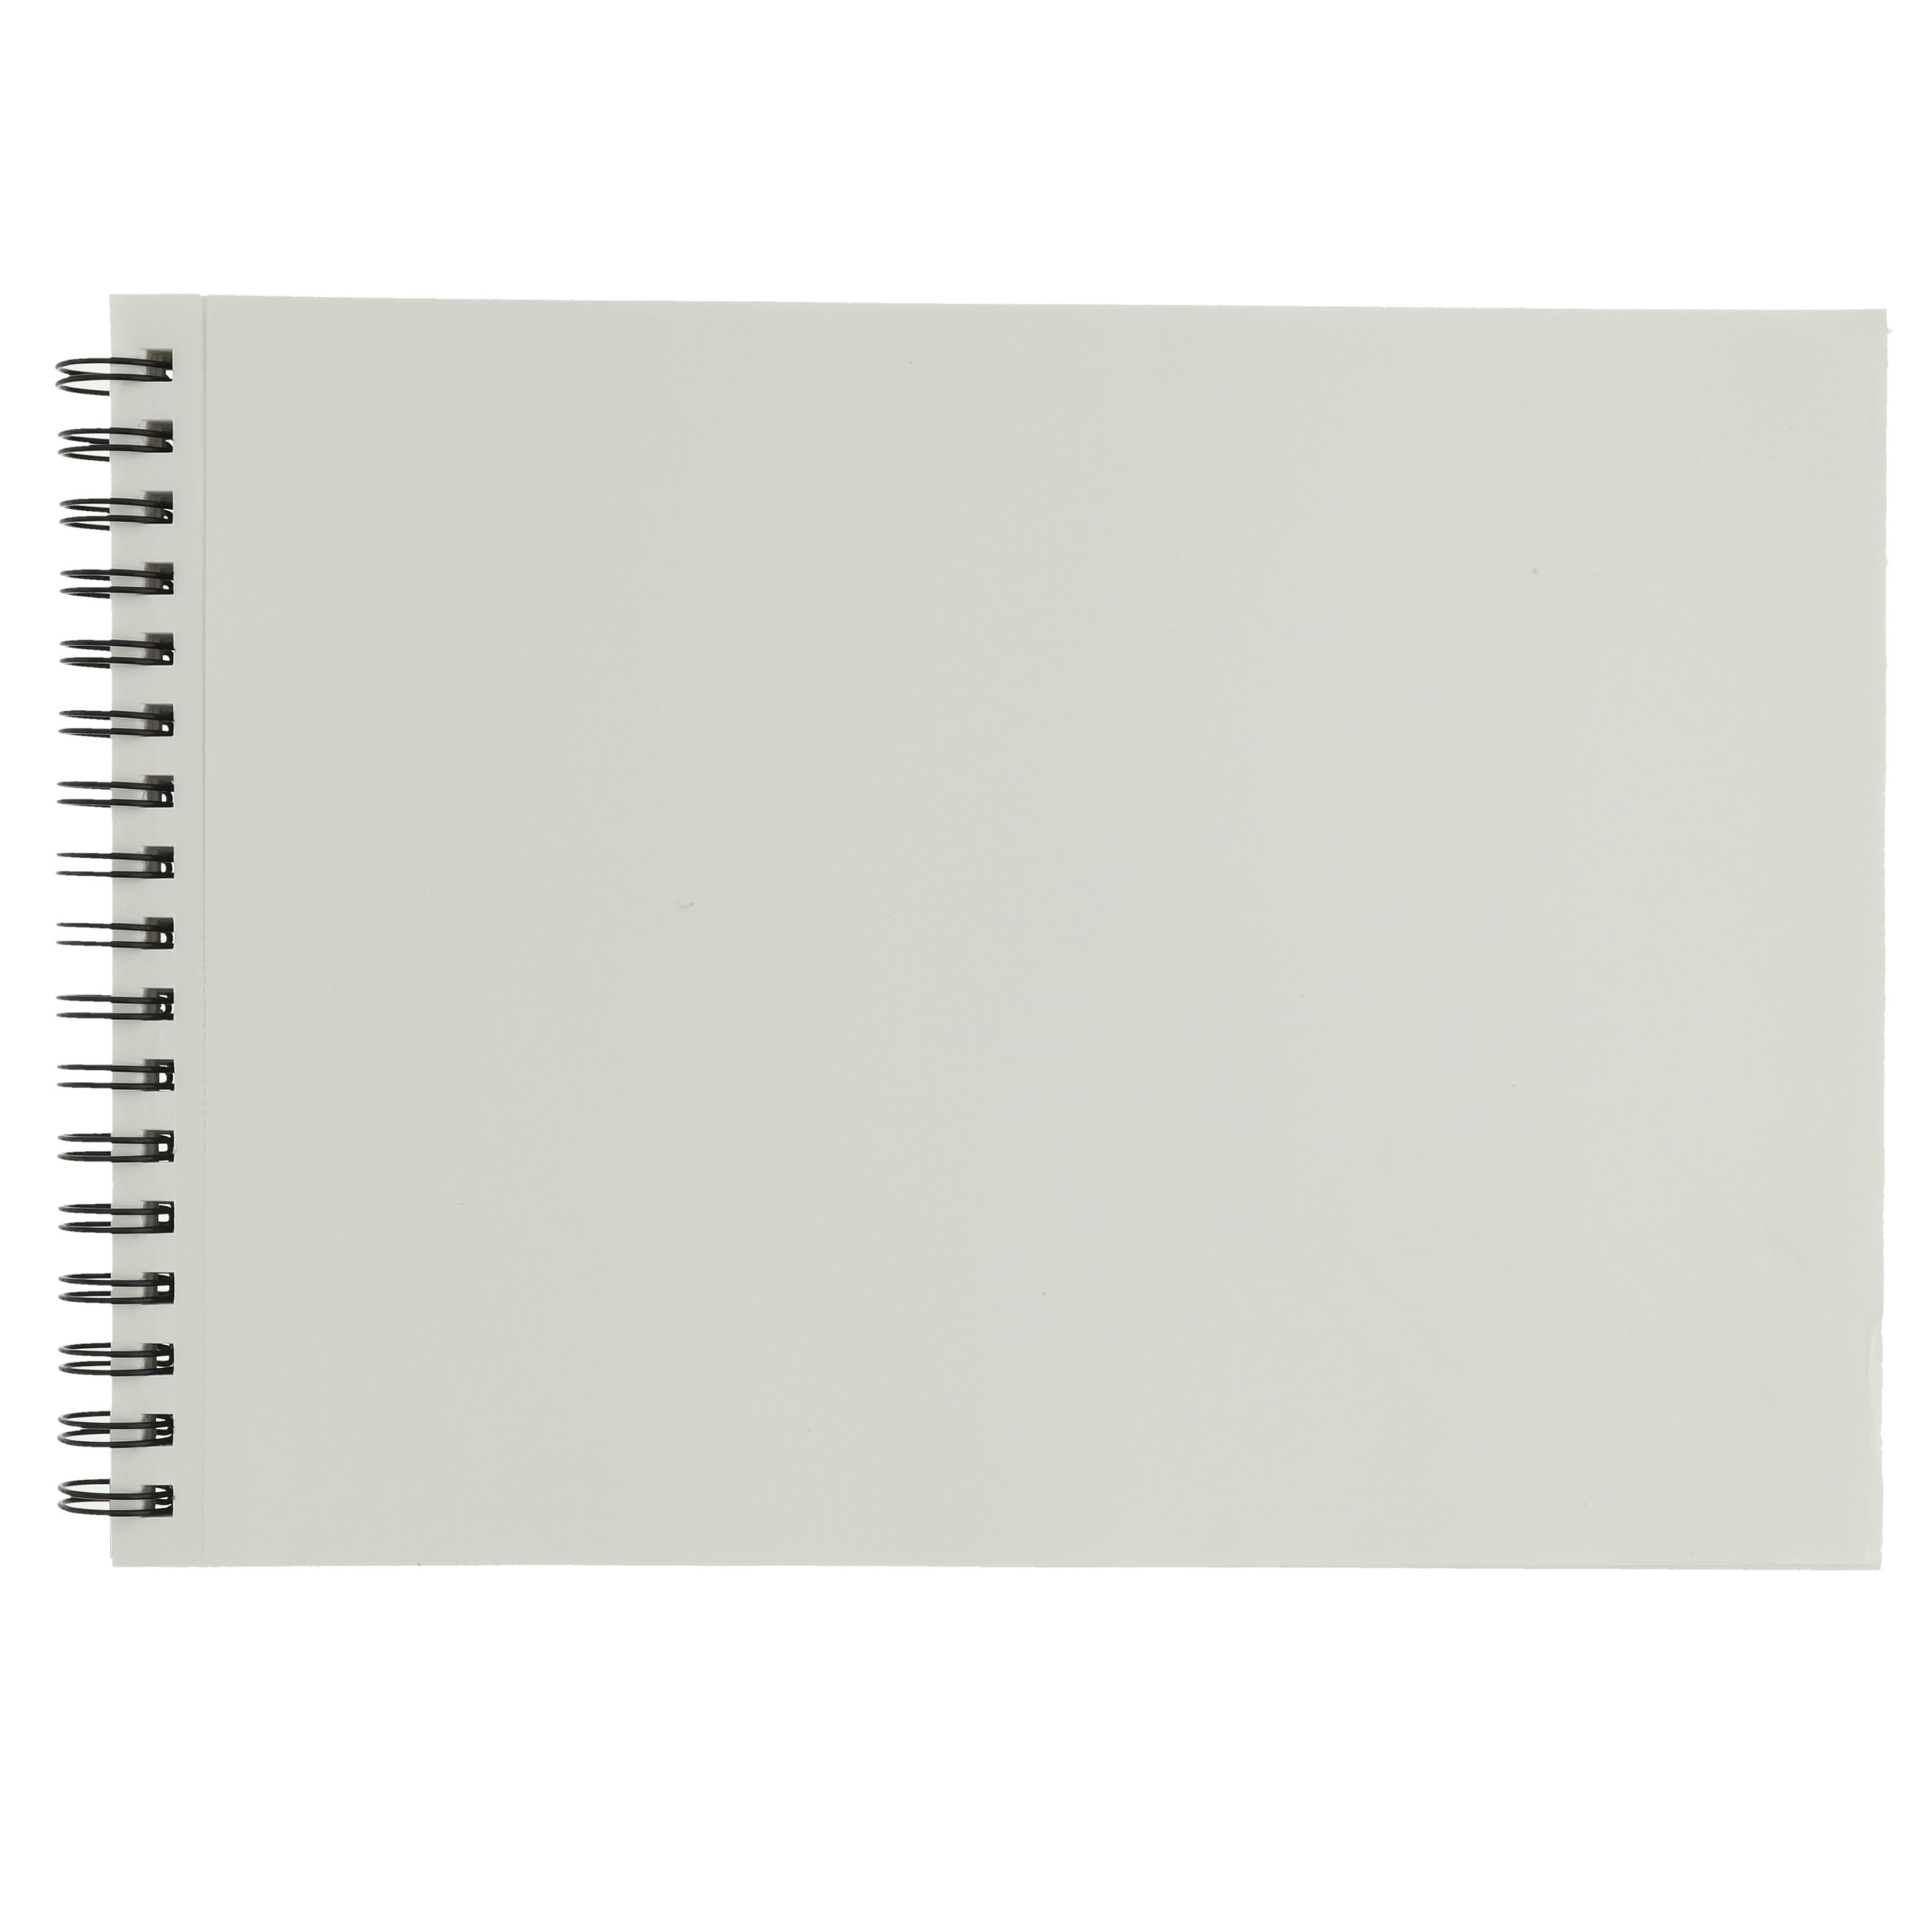  Bellofy 3 x Drawing Paper Pads 9” x 12”, 300 Sheets, 60lbs  85g, Acid Free Sketchbook Paper for Dry Media